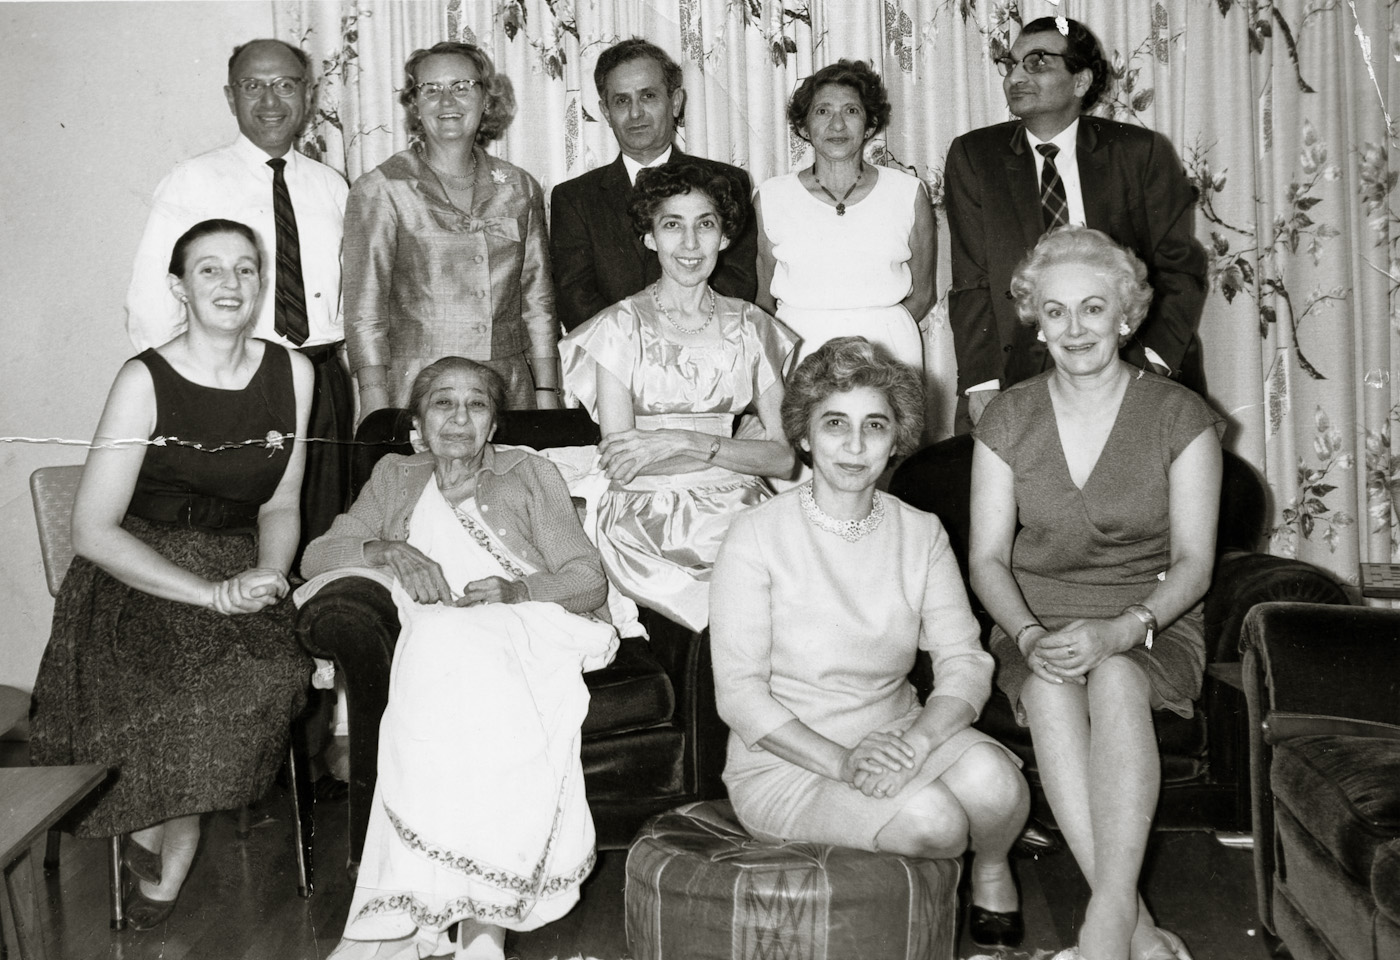 March, probably 1965. The entire Parsi community of the 1960s is in this photo.

Seated: (from left) My mother, old Mrs. Byram, one of her daughters (either Jilloo or Silloo - I cannot recall which), I cannot recall who the woman on the Ottoman was, possibly a third Byram sister?), and Mrs. Contractor.

Standing: Mr. and Mrs. Patel, Mr. Contractor, the other of the two Byram sisters, my father.

I knew the Patels for many years and Mrs. Patel (who is Dutch) attended the Unitarian church with my family. Aside from my mother, she is the only other person in the photo who is still alive. Mrs. Bryam was a sweet lady. I liked her very much. I recall, however, that she was diabetic and her daughters would slap her hand if she tried to take a candy or sweet. View full size.